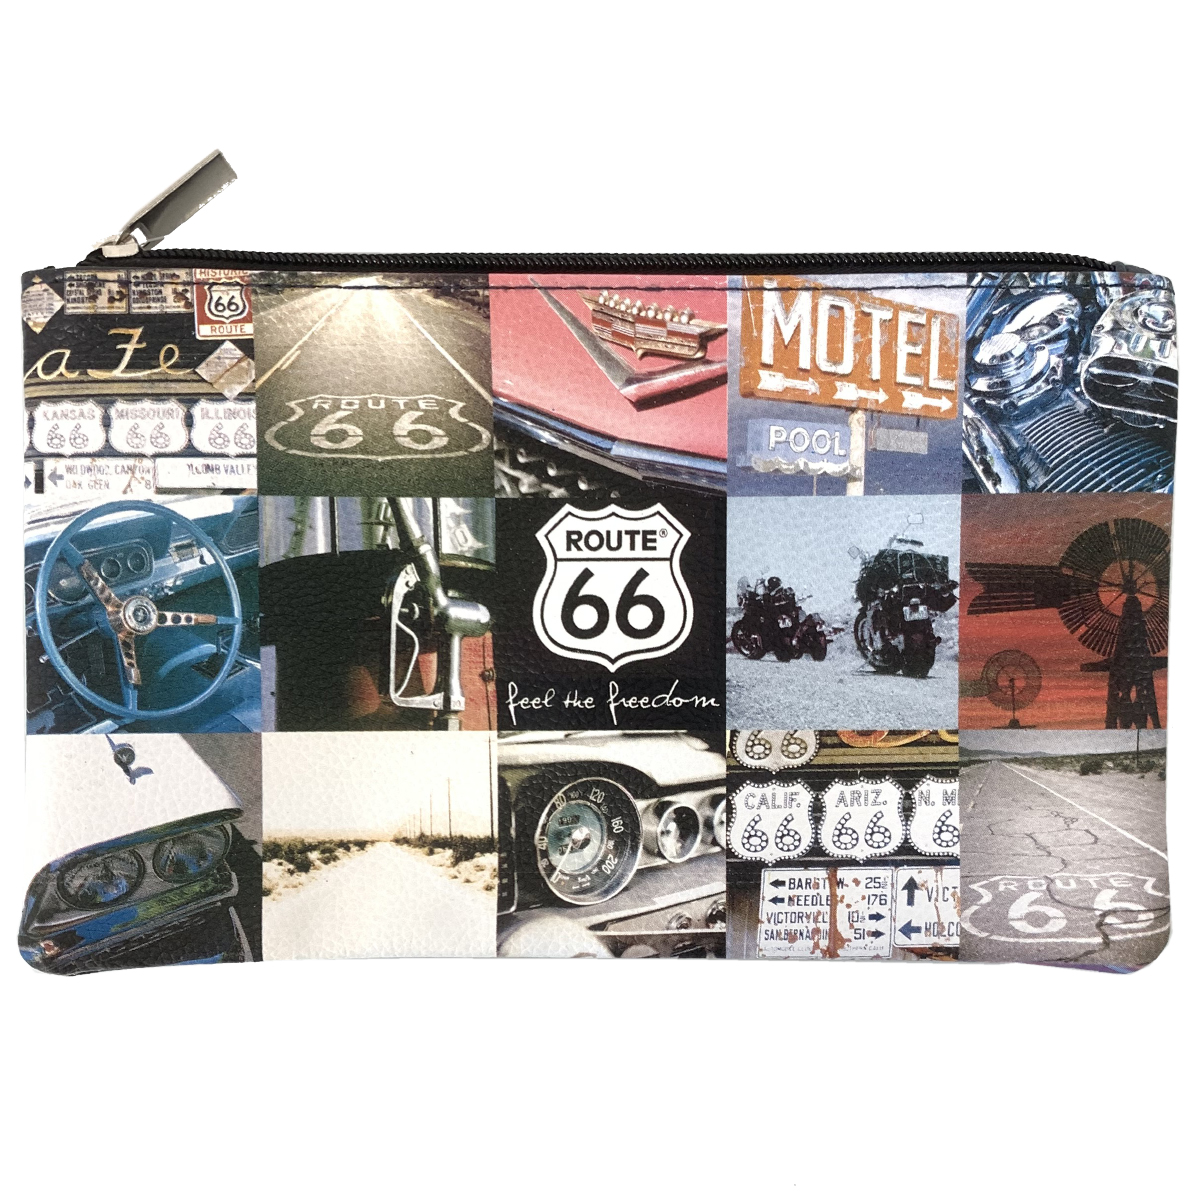 Us Route 66 cosmetic bag